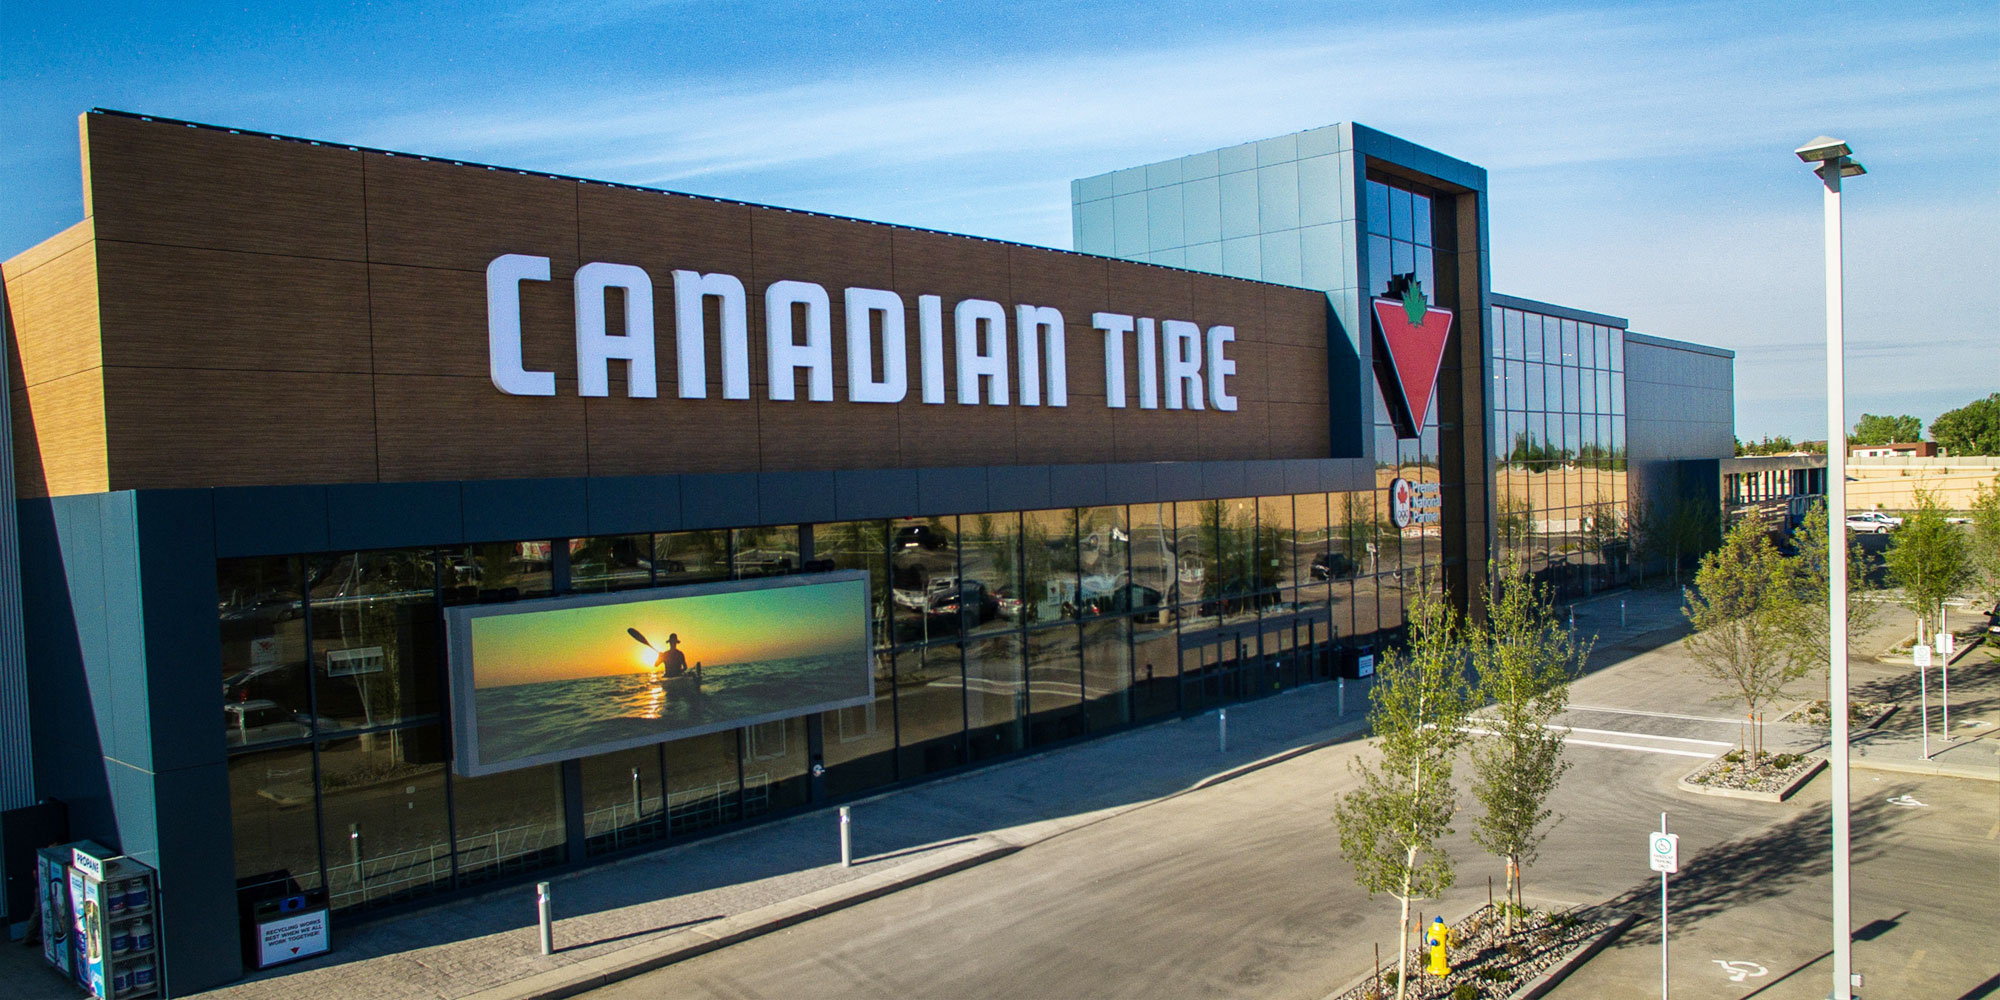 Trusted by Canadian Tire